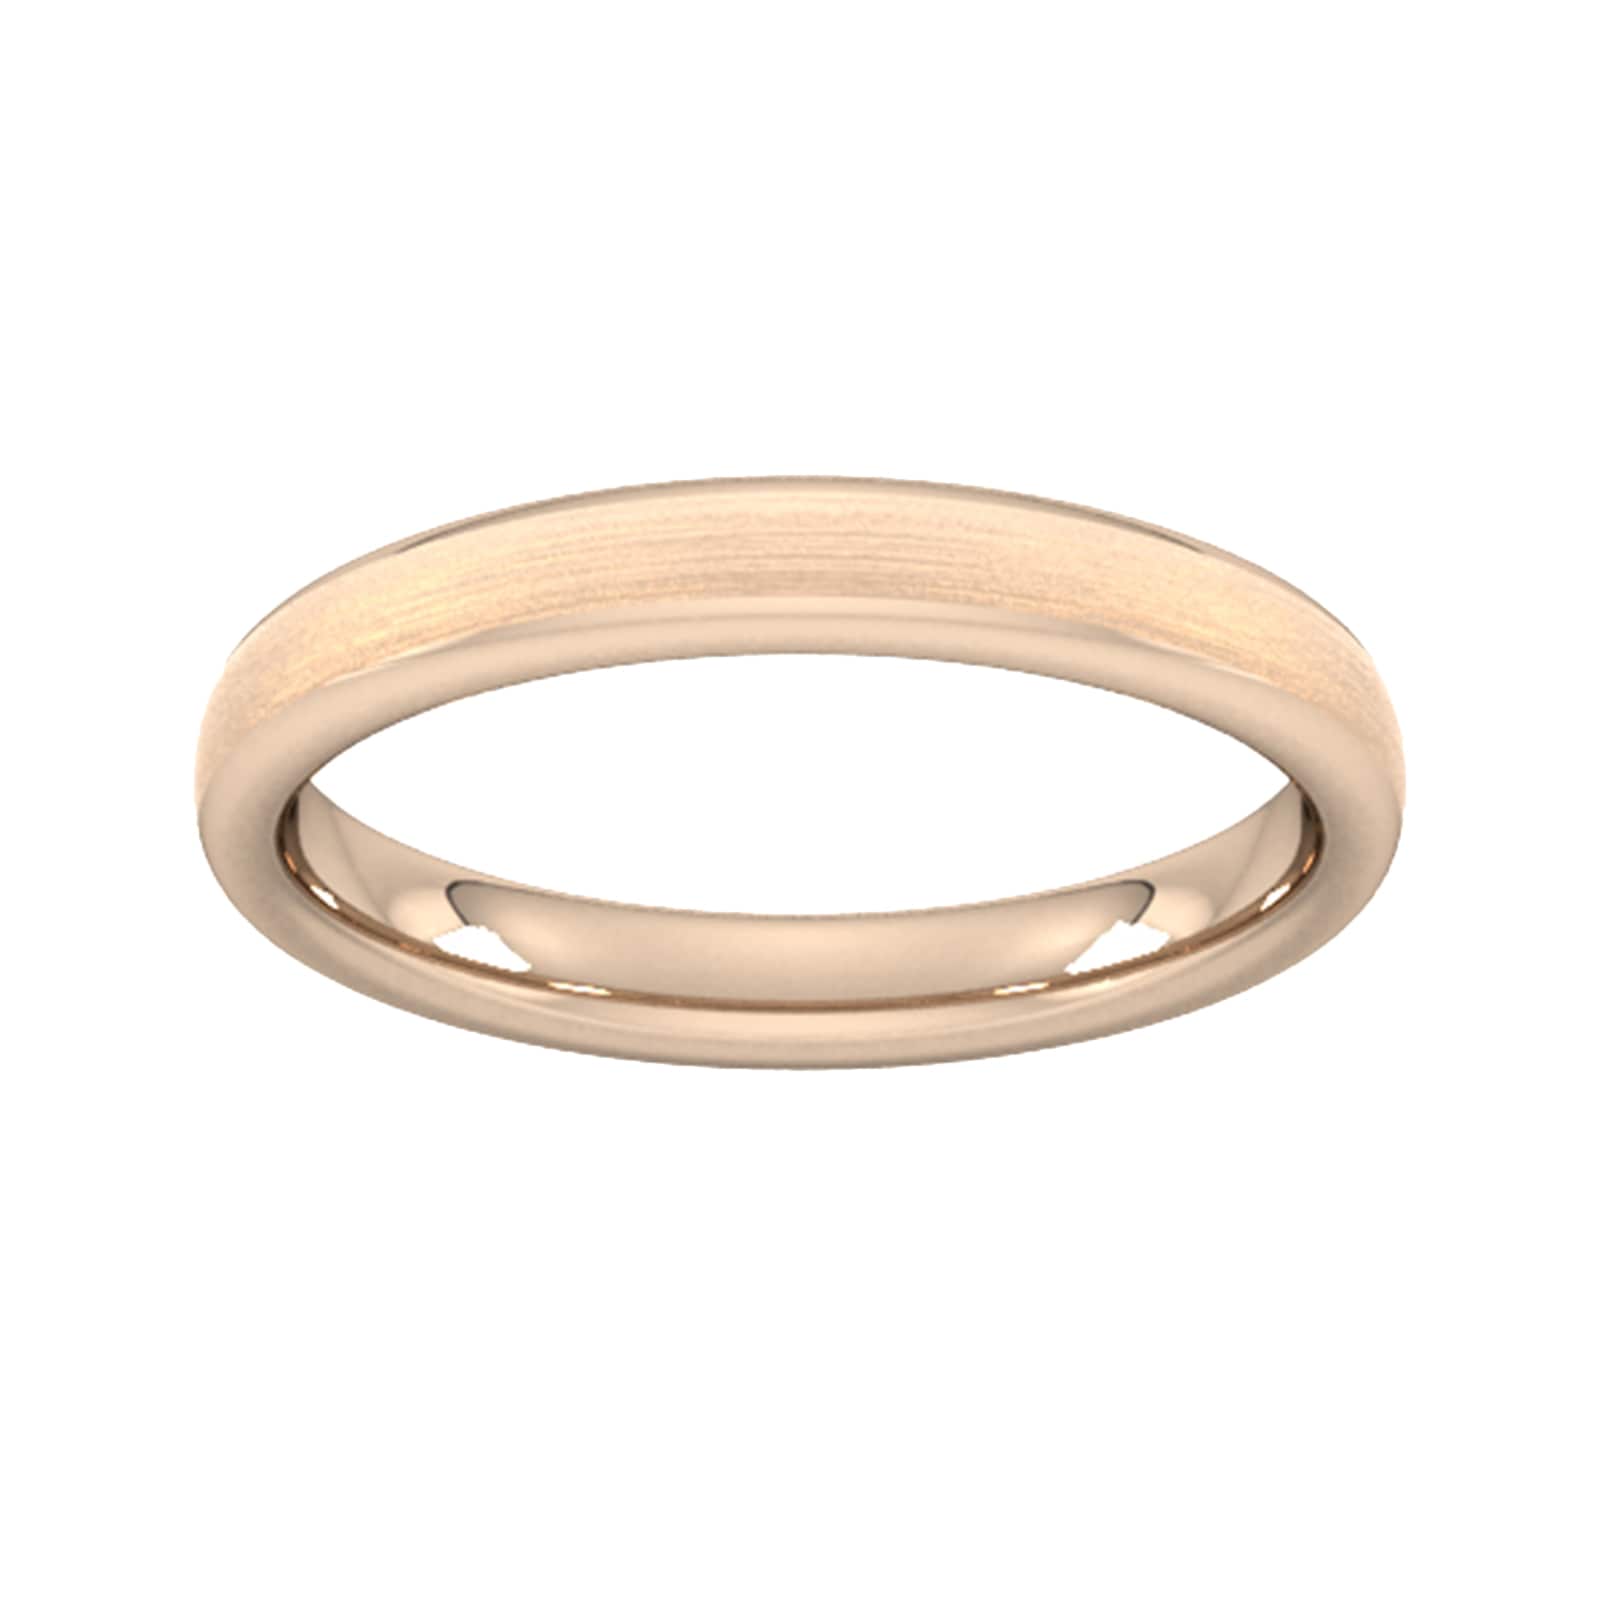 3mm Flat Court Heavy Matt Finished Wedding Ring In 18 Carat Rose Gold - Ring Size H